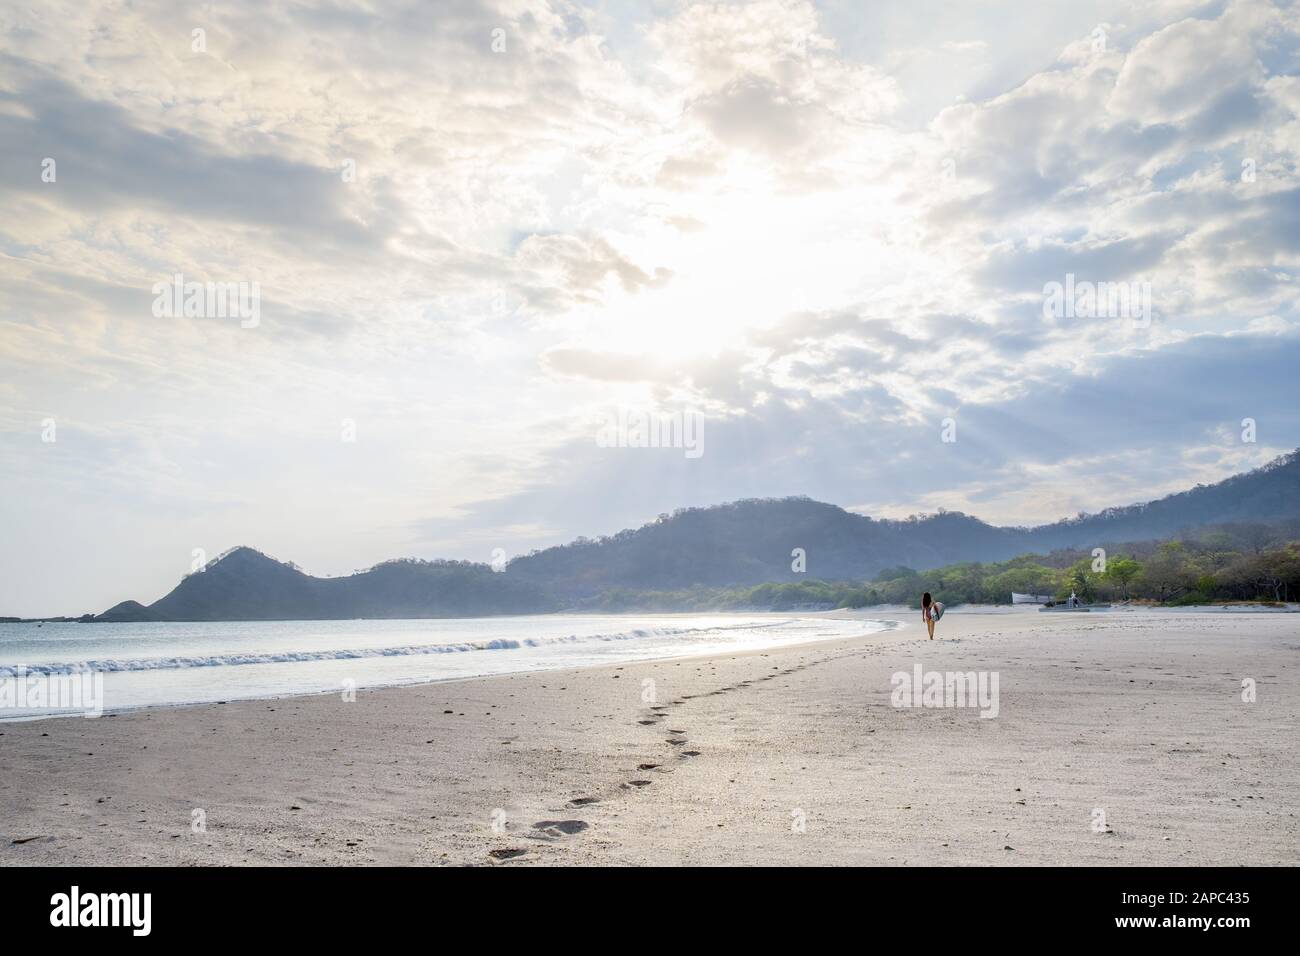 Central America, Nicaragua, San Juan del Sur. A woman surfer leaving footfalls on an empty white sand beach at sunset Stock Photo